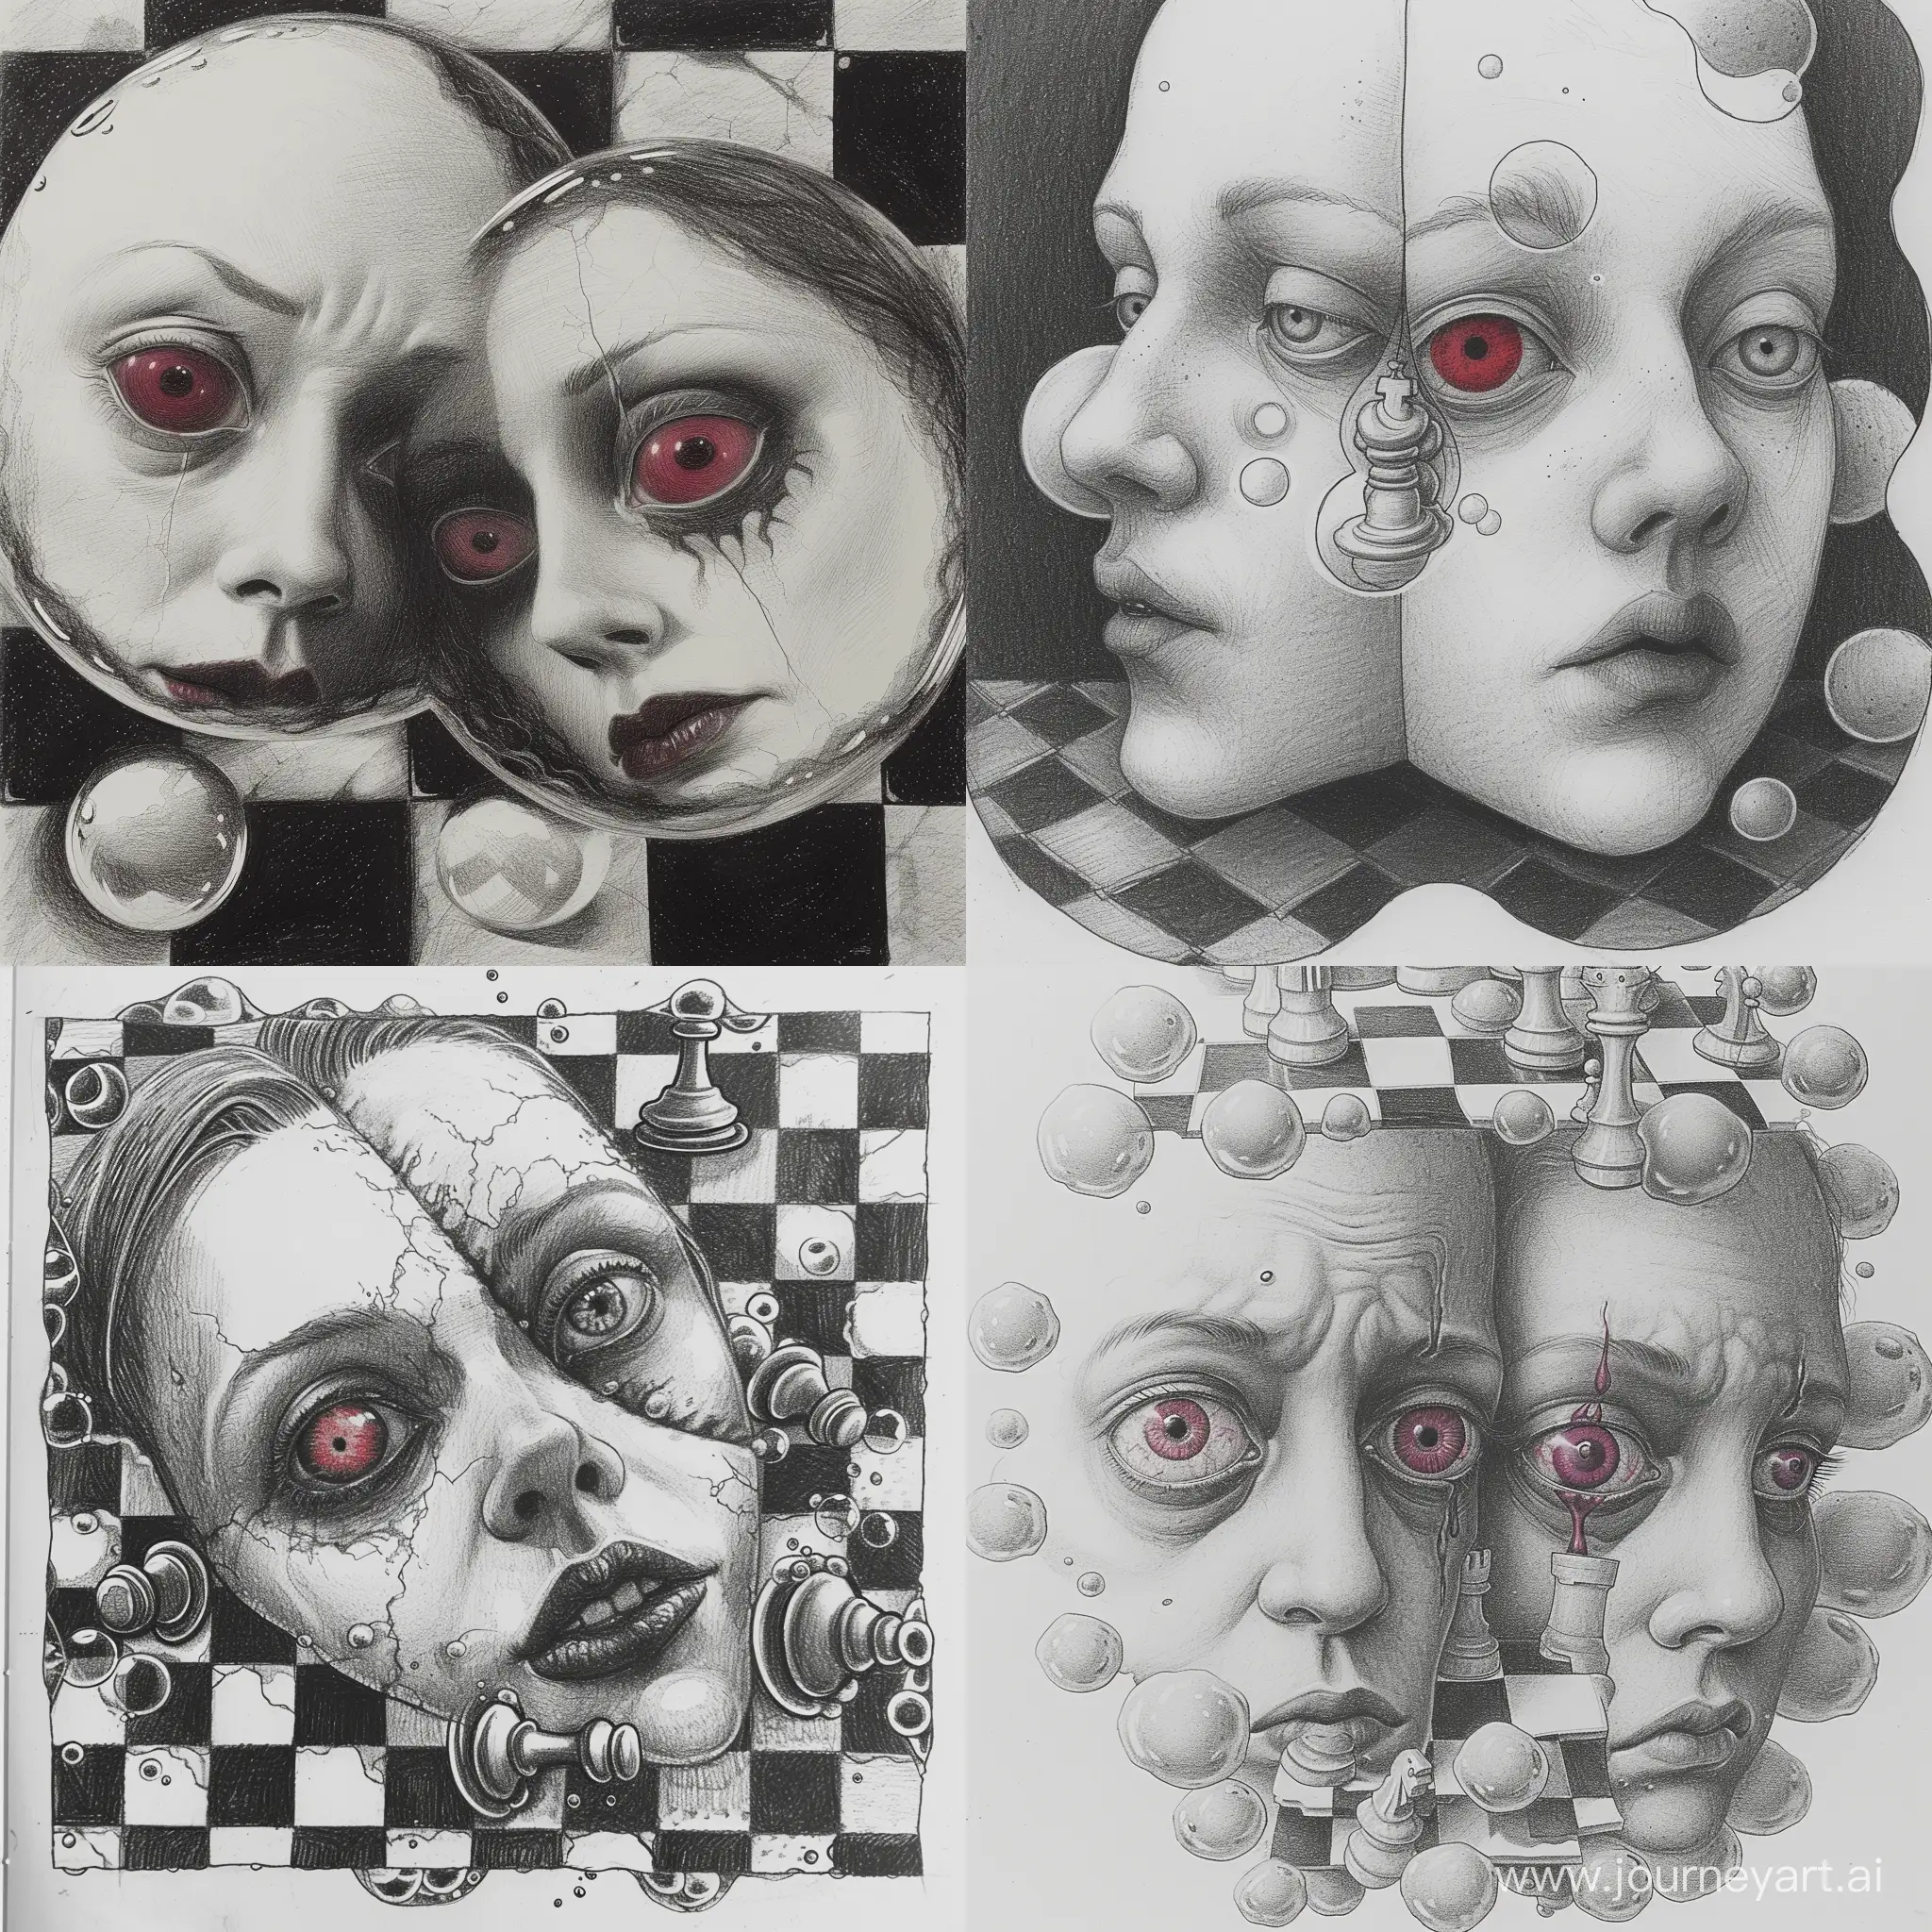 Harlequin-Faces-with-Scarlet-Tears-A-Surreal-Pencil-Drawing